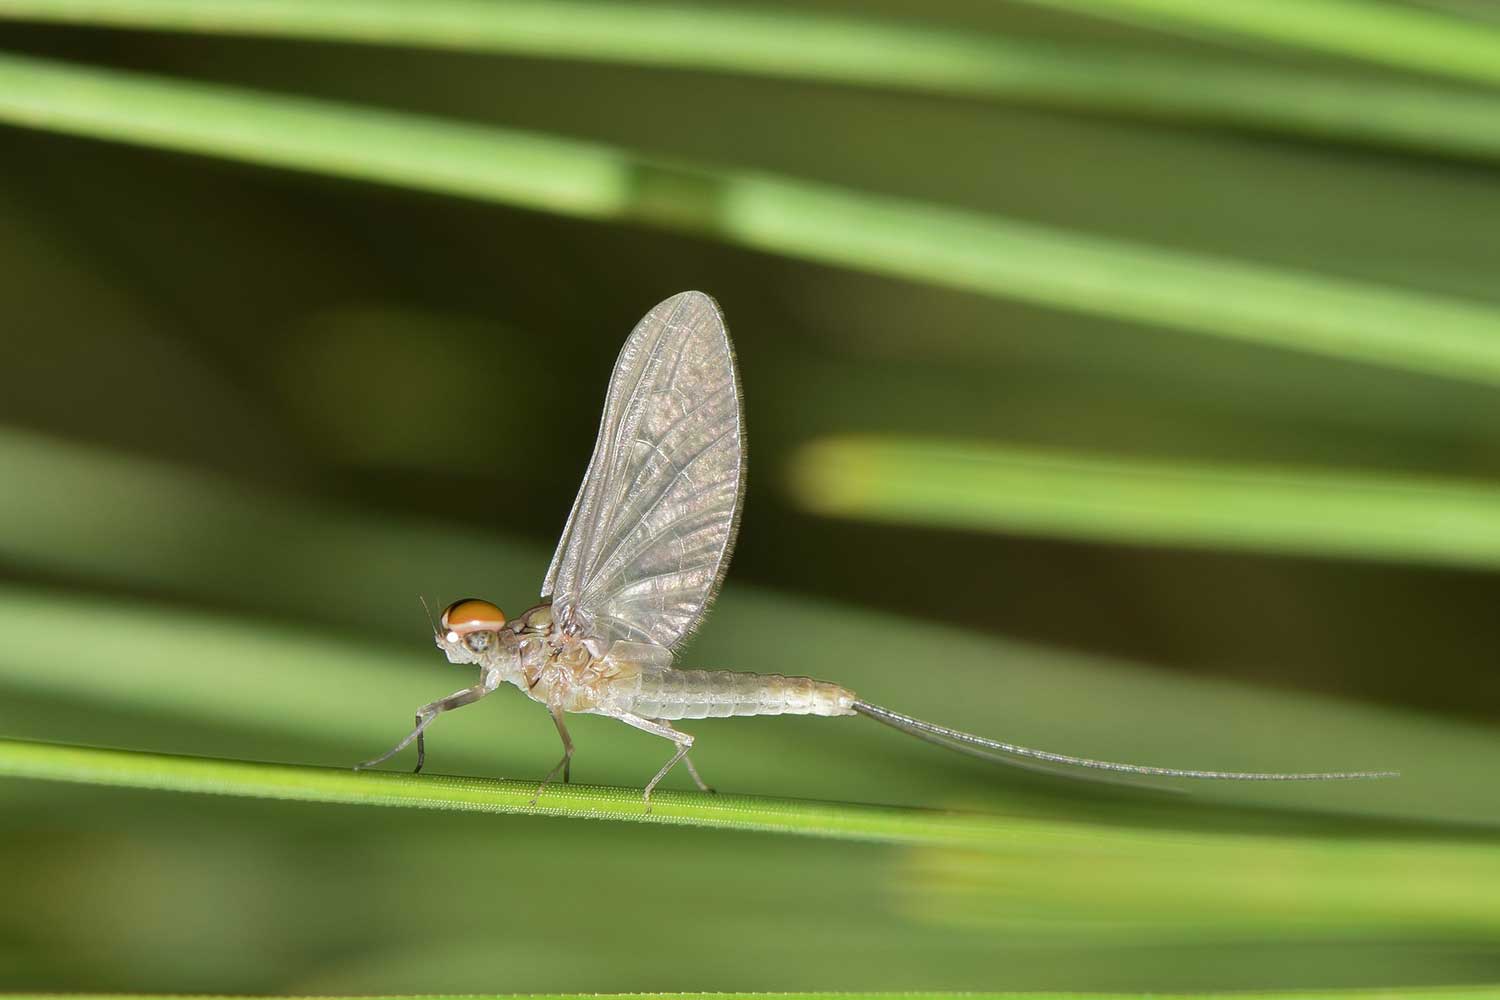 Mayfly sitting on a blade of grass